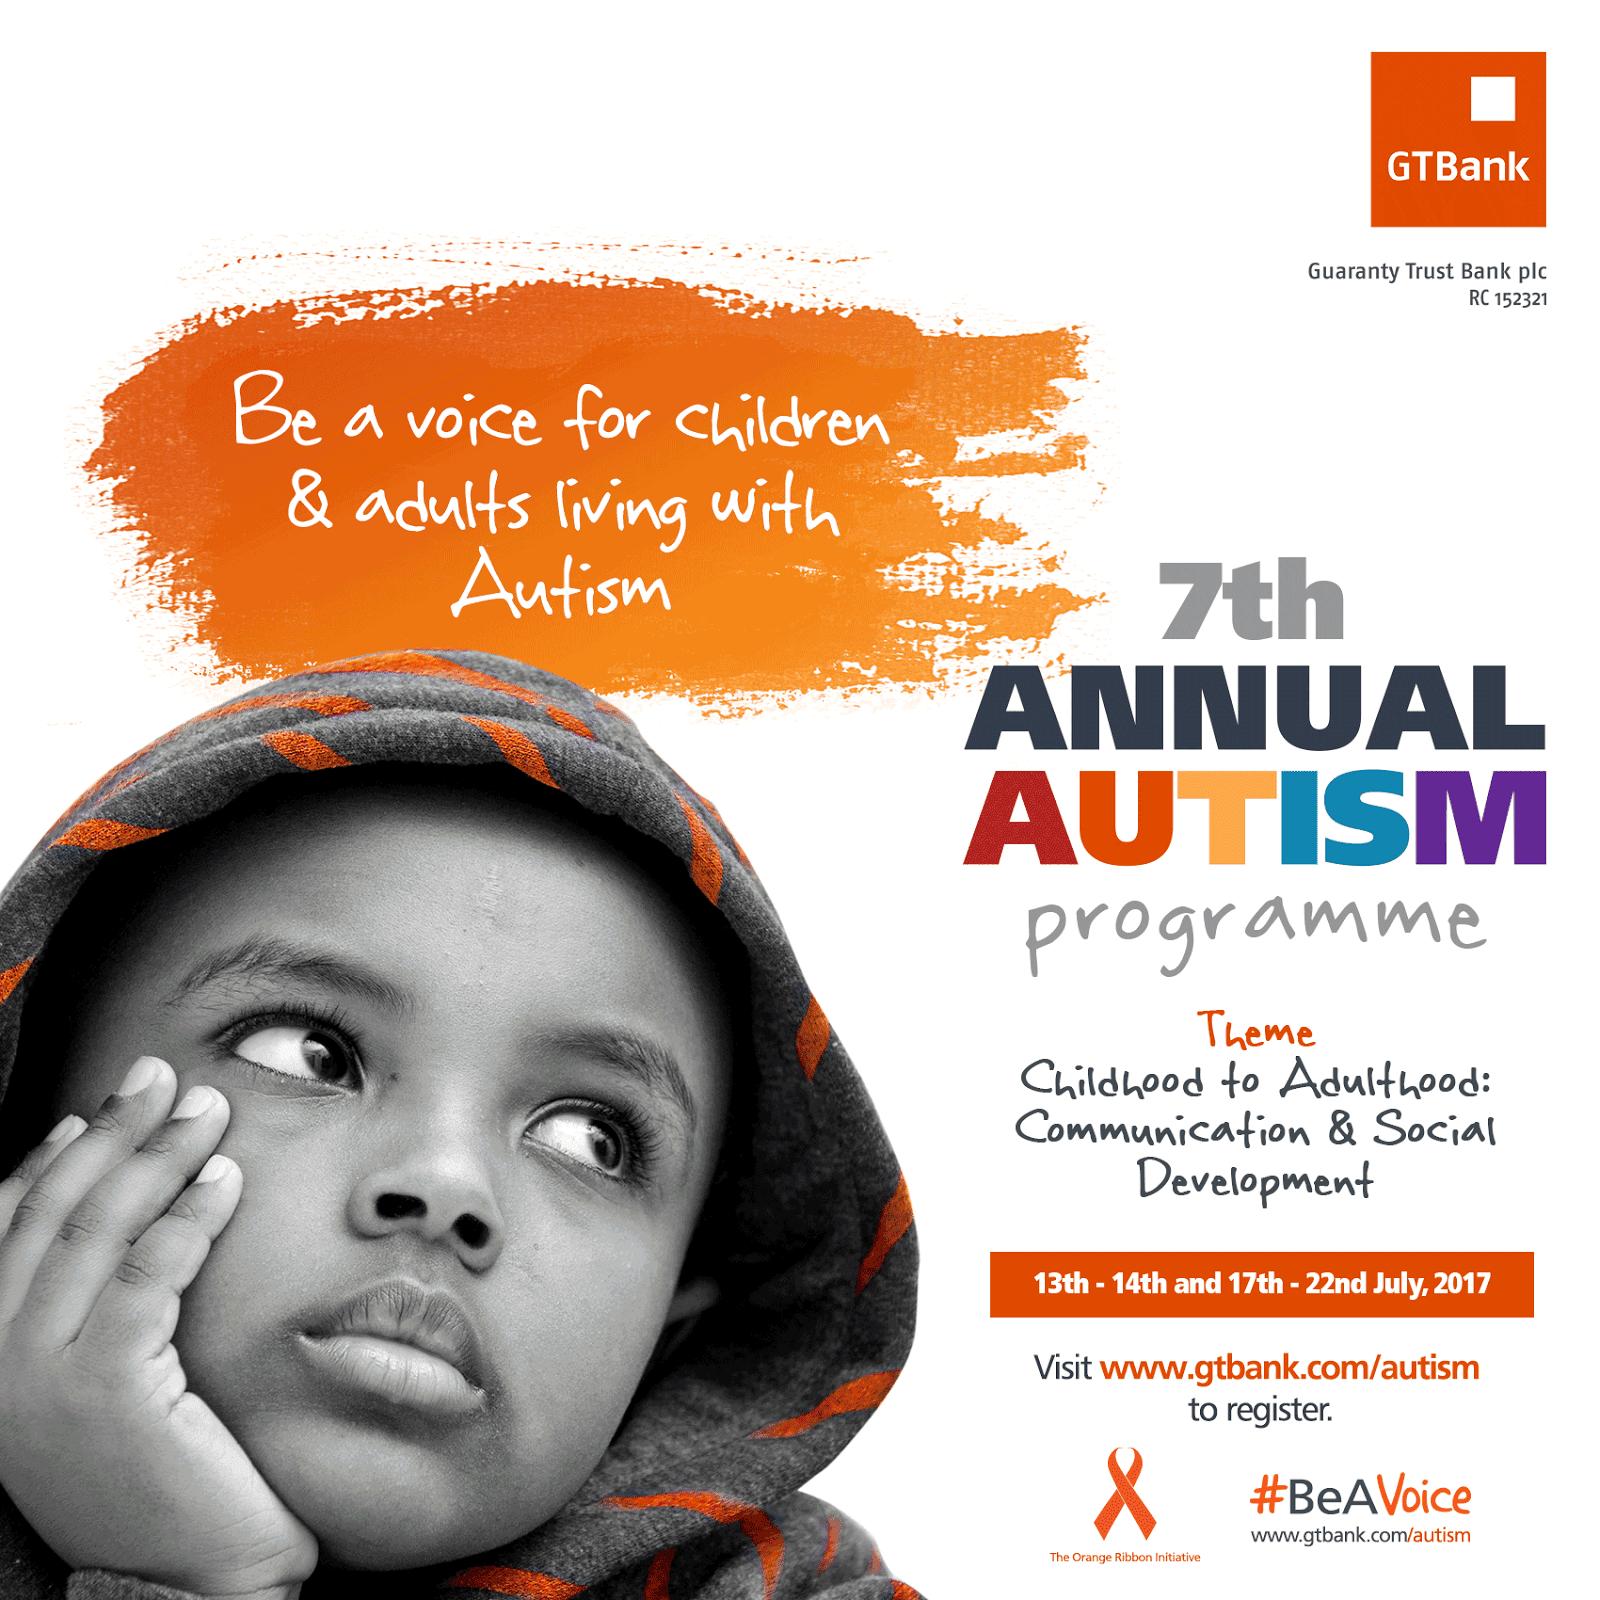 gtbank-holds-7th-annual-autism-program-brand-icon-image-latest-brand-tech-and-business-news